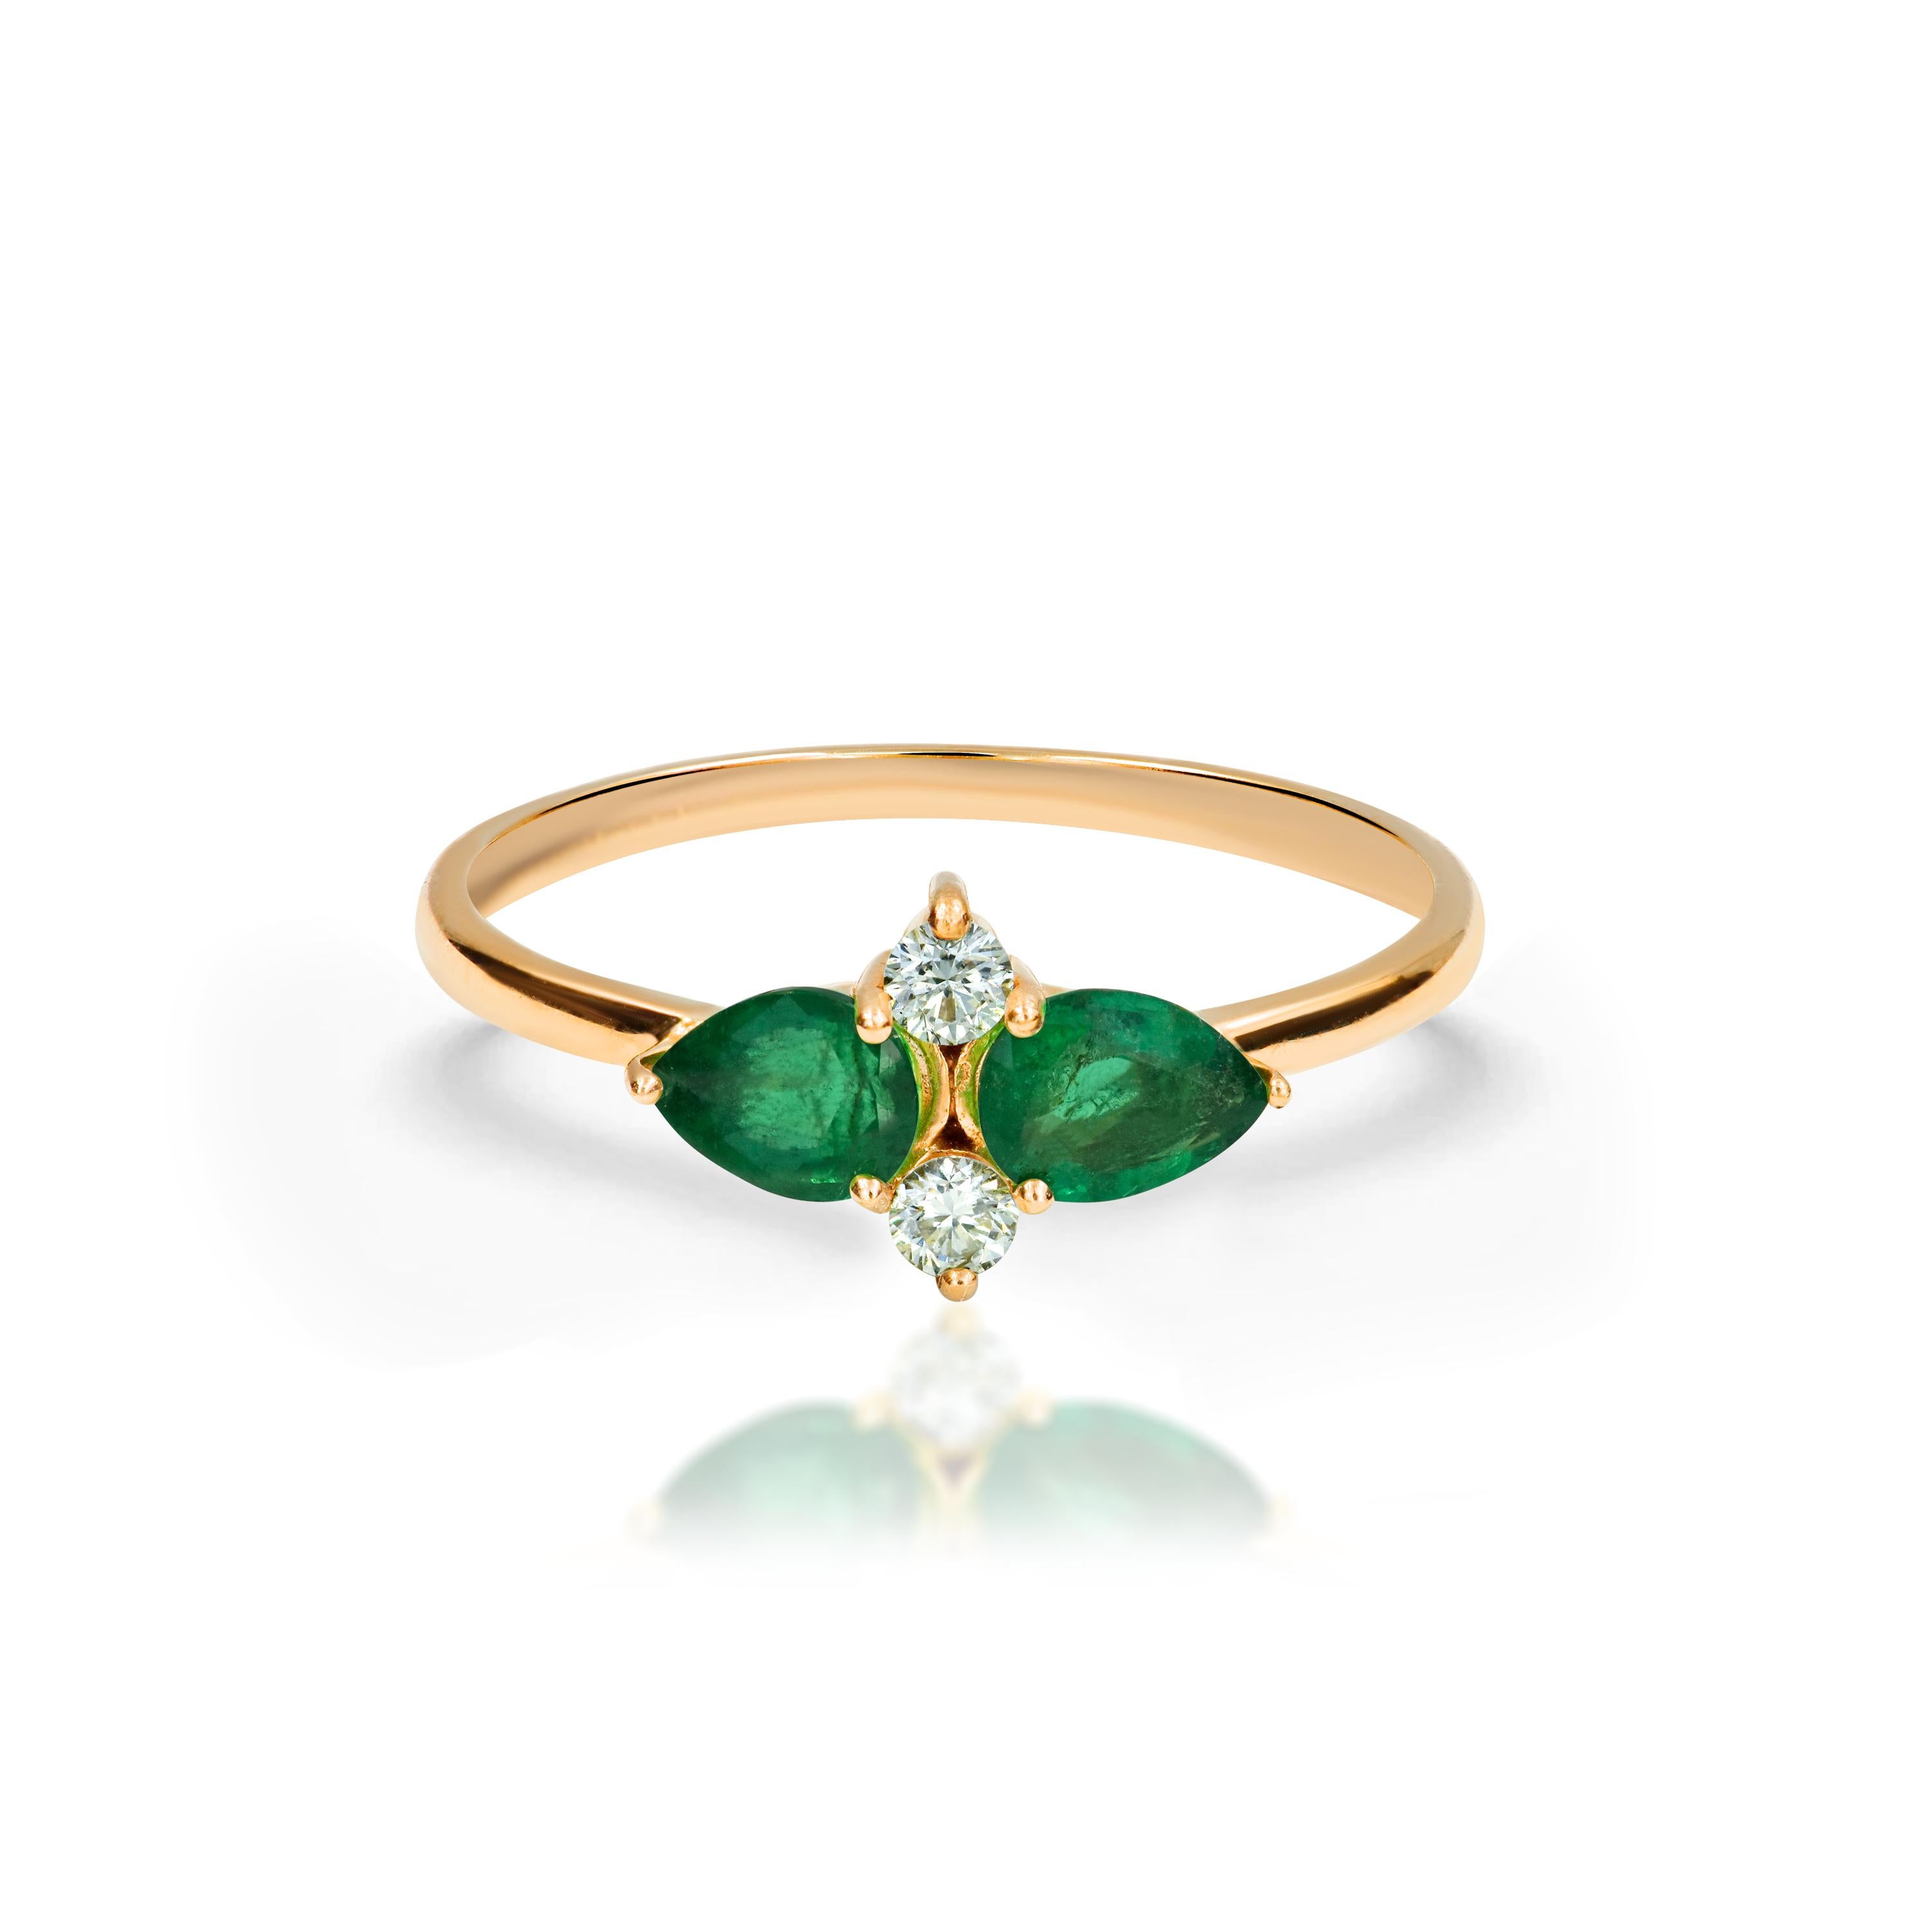 For Sale:  14k Gold Pear Shape 0.56 Carat Emerald and Diamond Engagement Ring 2